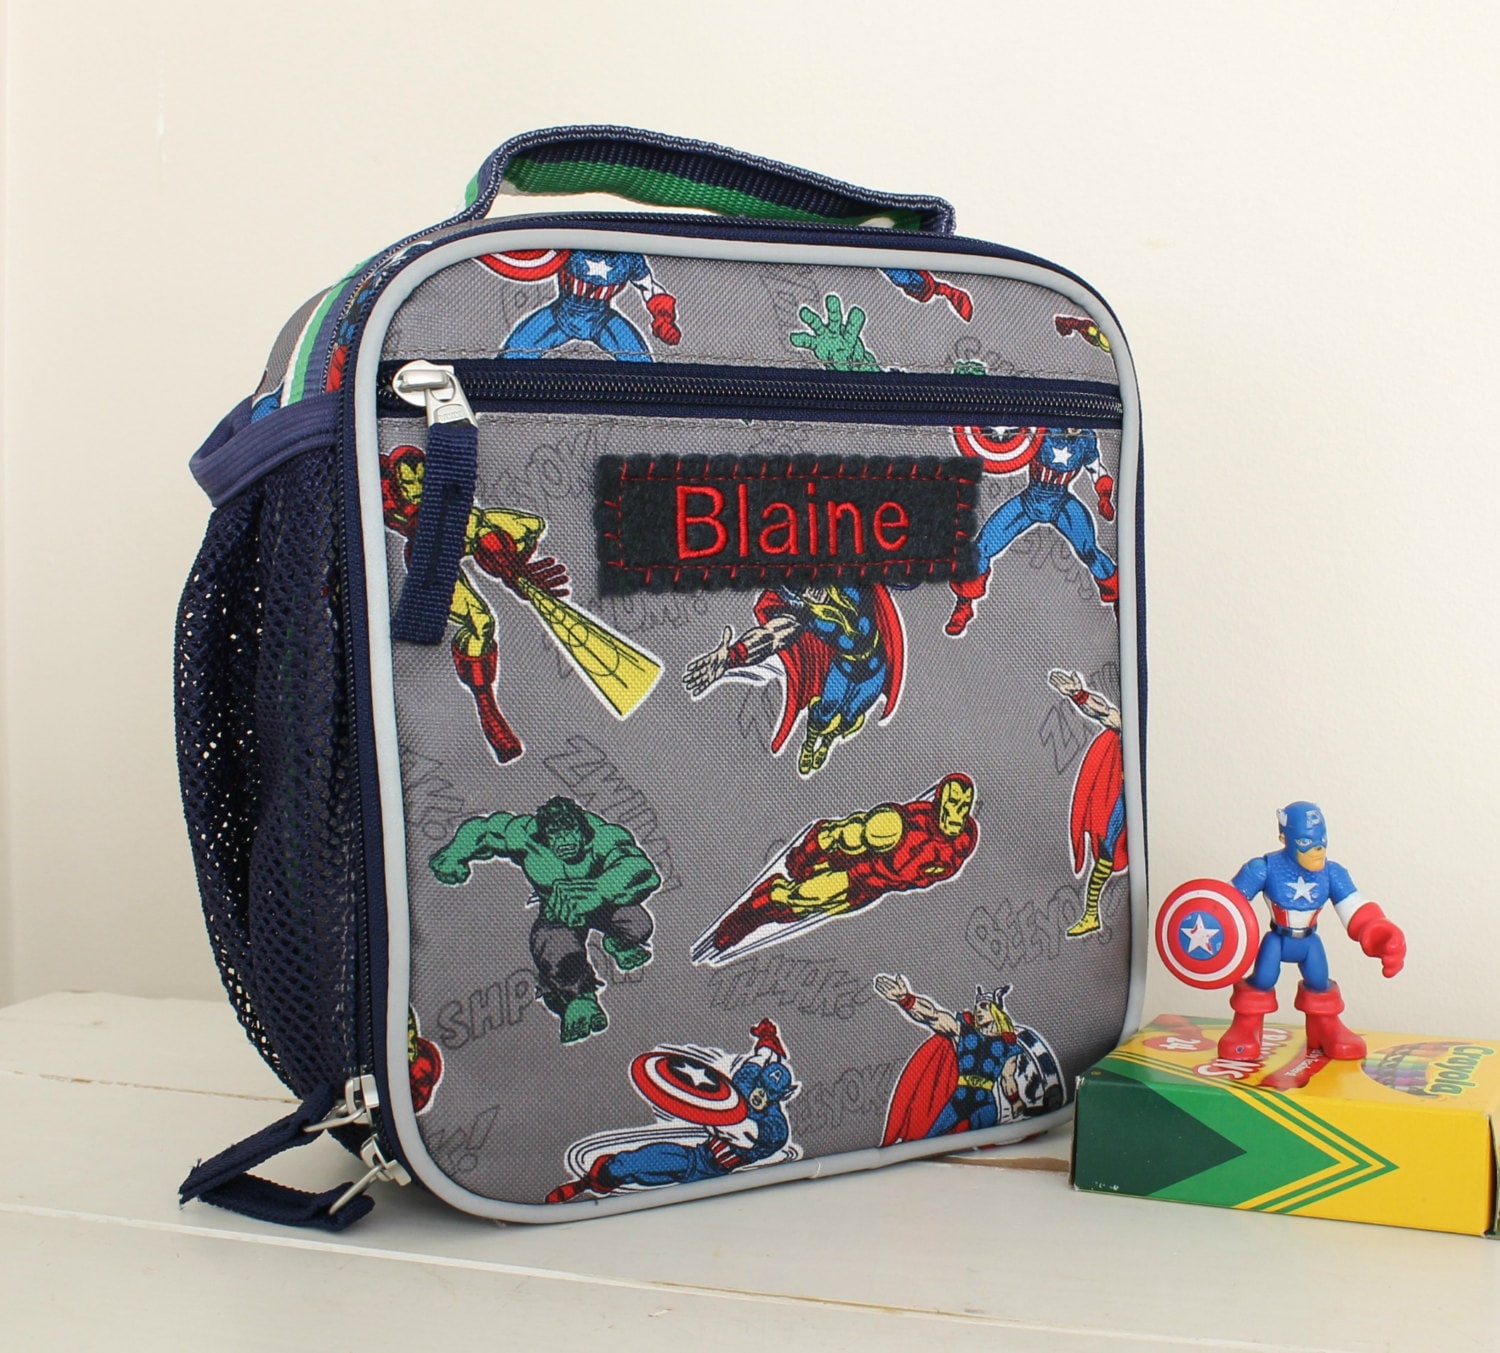 Marvel Superheroes Lunch Box Personalized Pottery Barn